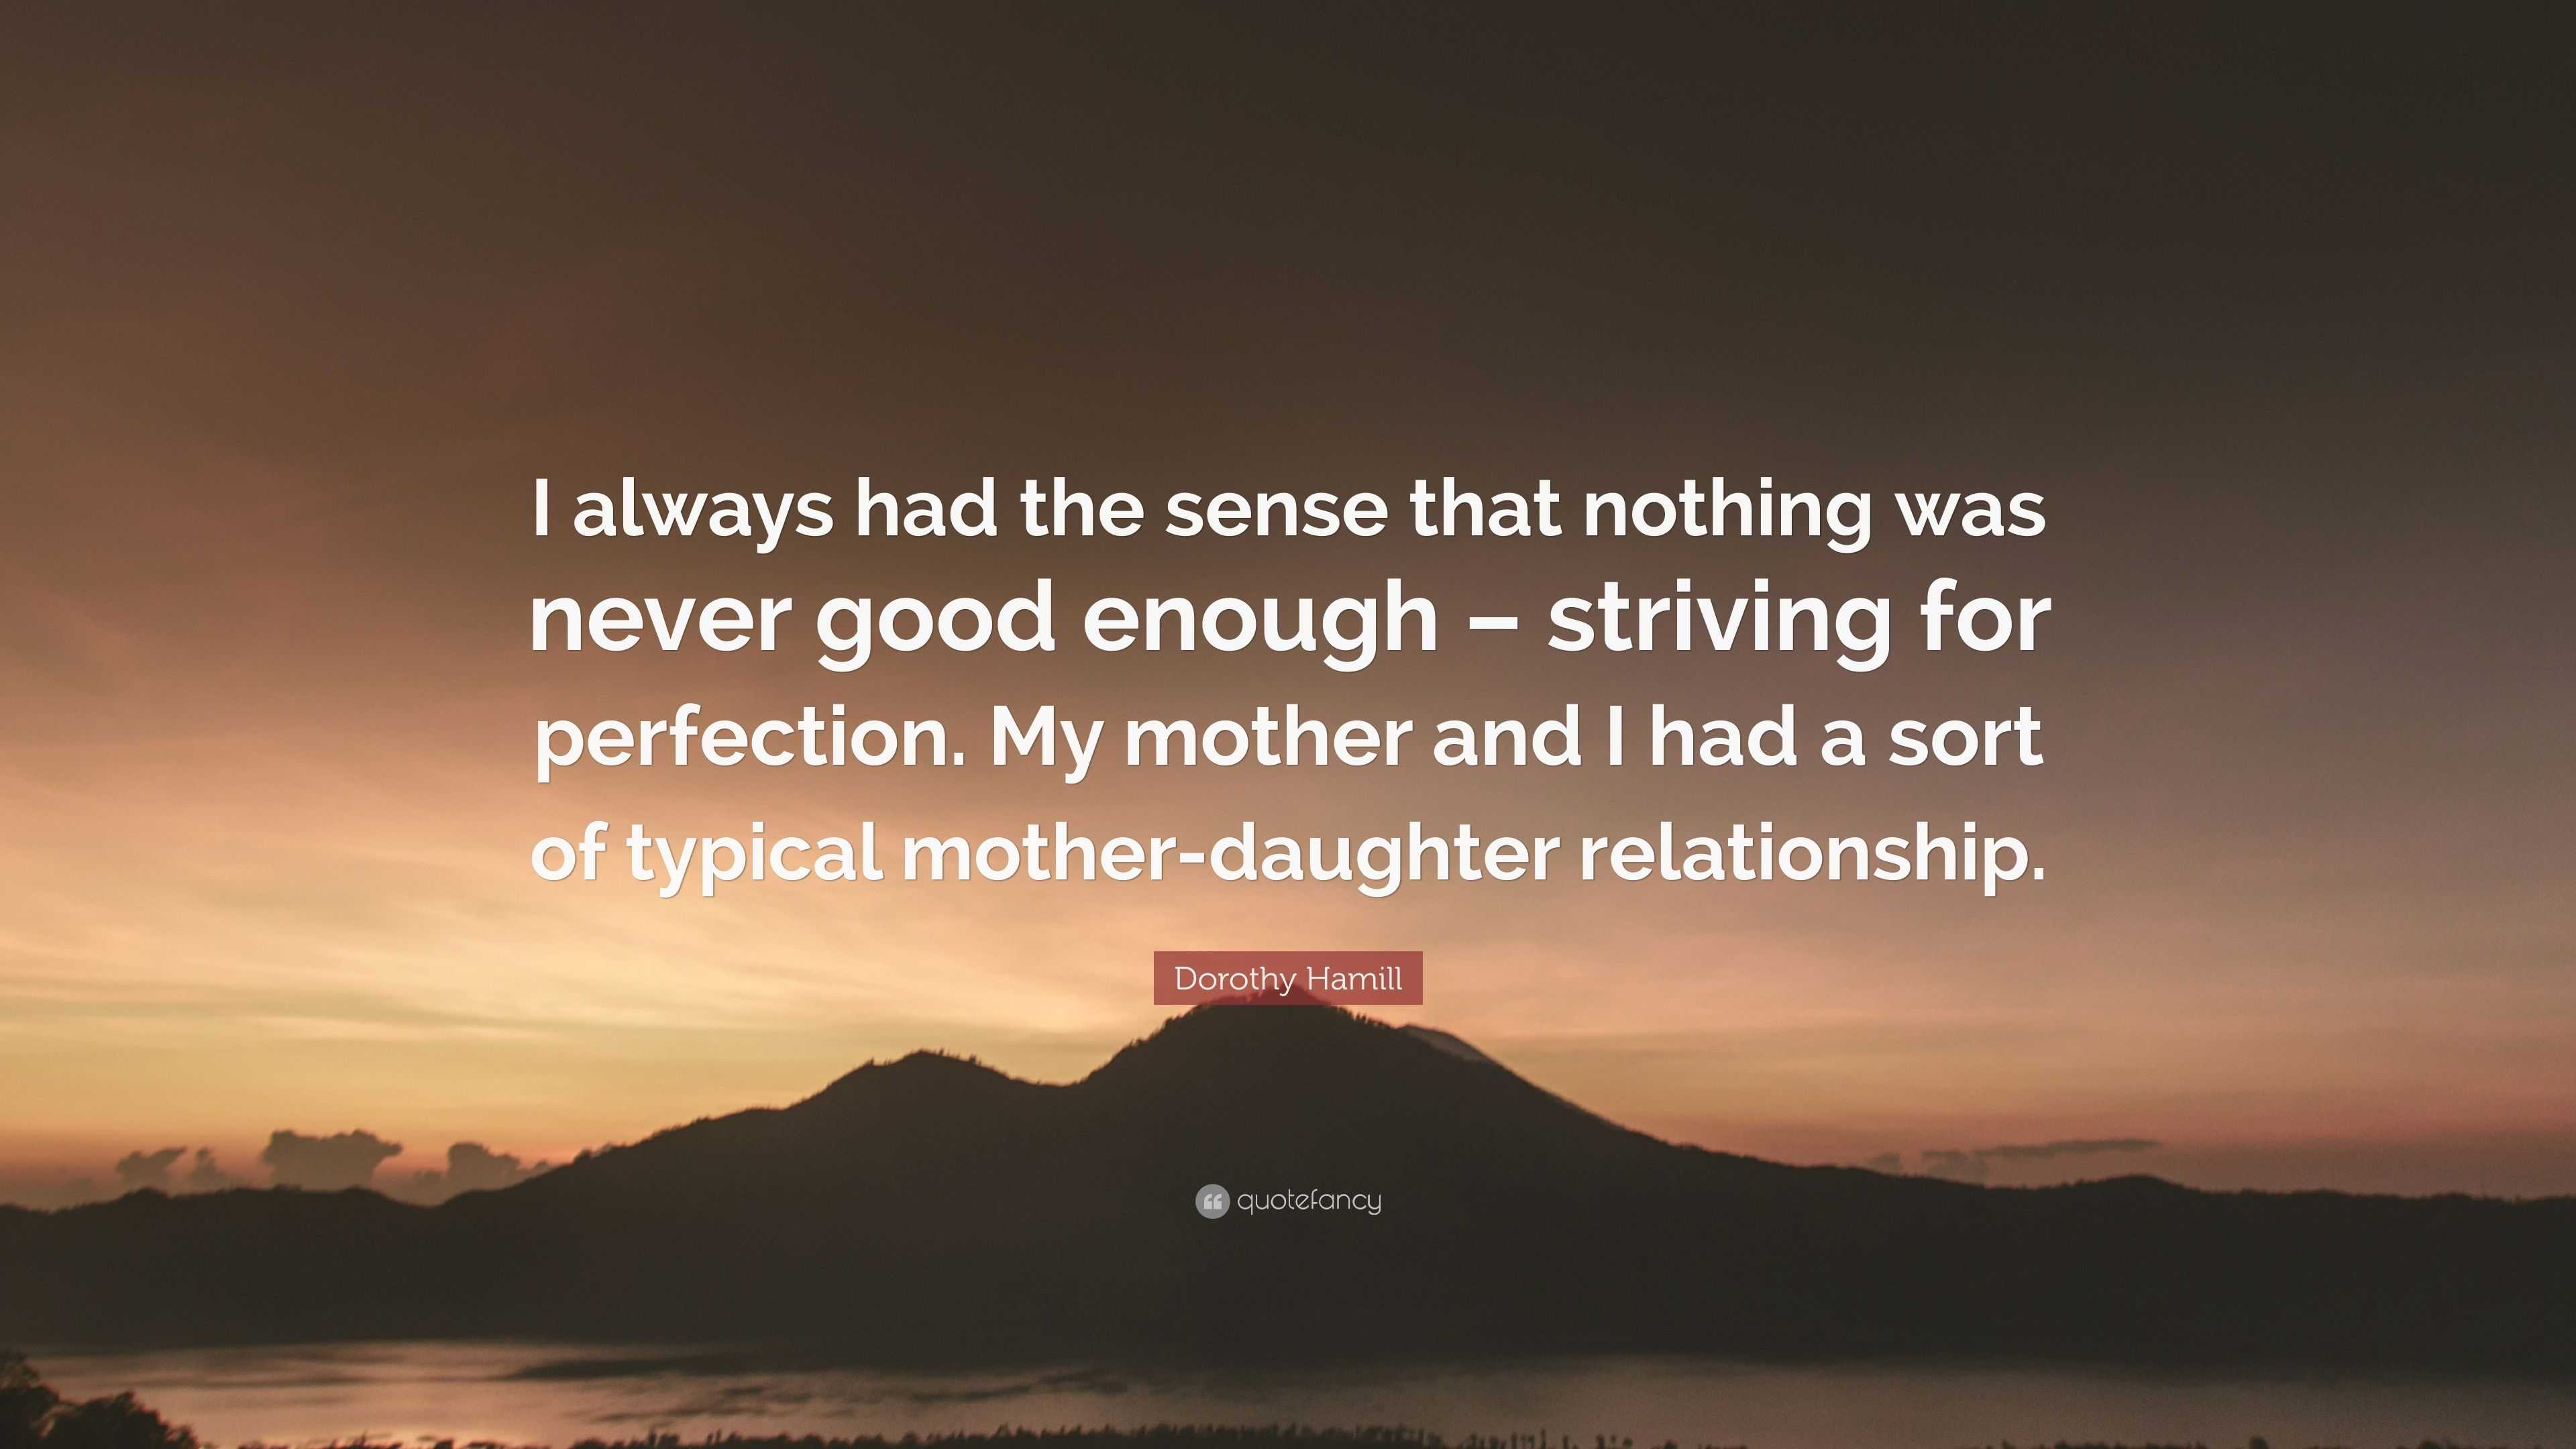 Dorothy Hamill Quote I Always Had The Sense That Nothing Was Never Good Enough Striving For Perfection My Mother And I Had A Sort Of Typic